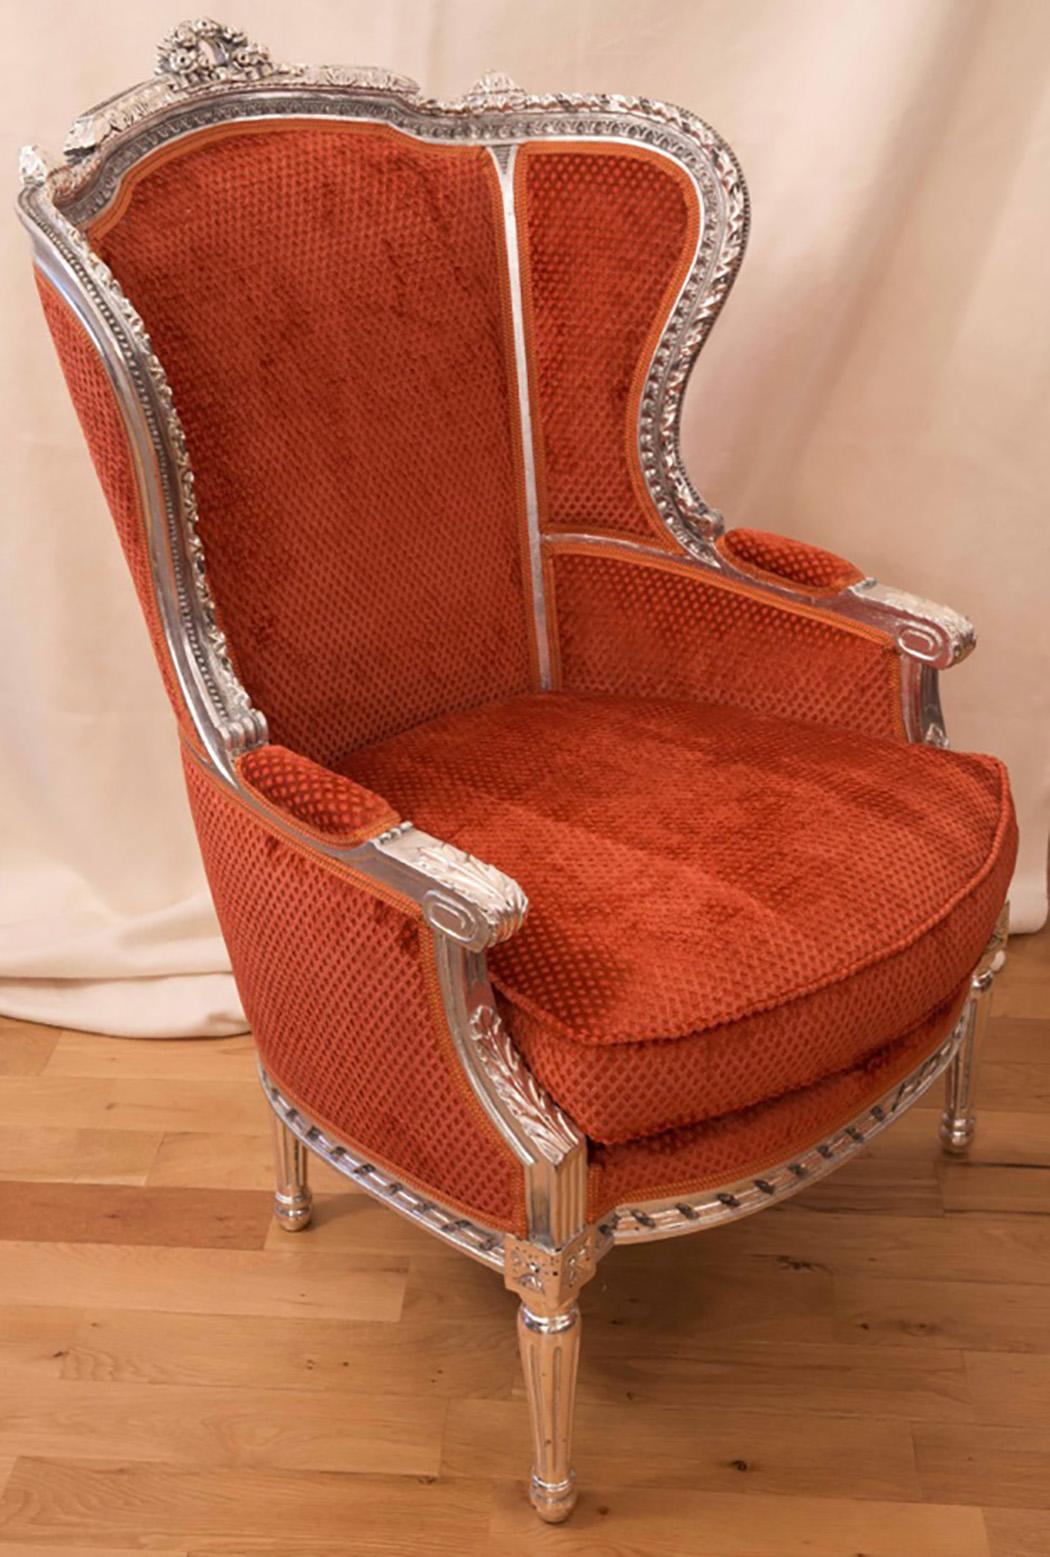 Pair of Swiss, French Armchairs, Louis XV Style, Rococo, Silvered, Brown-Red In Good Condition For Sale In Ettlingen, DE